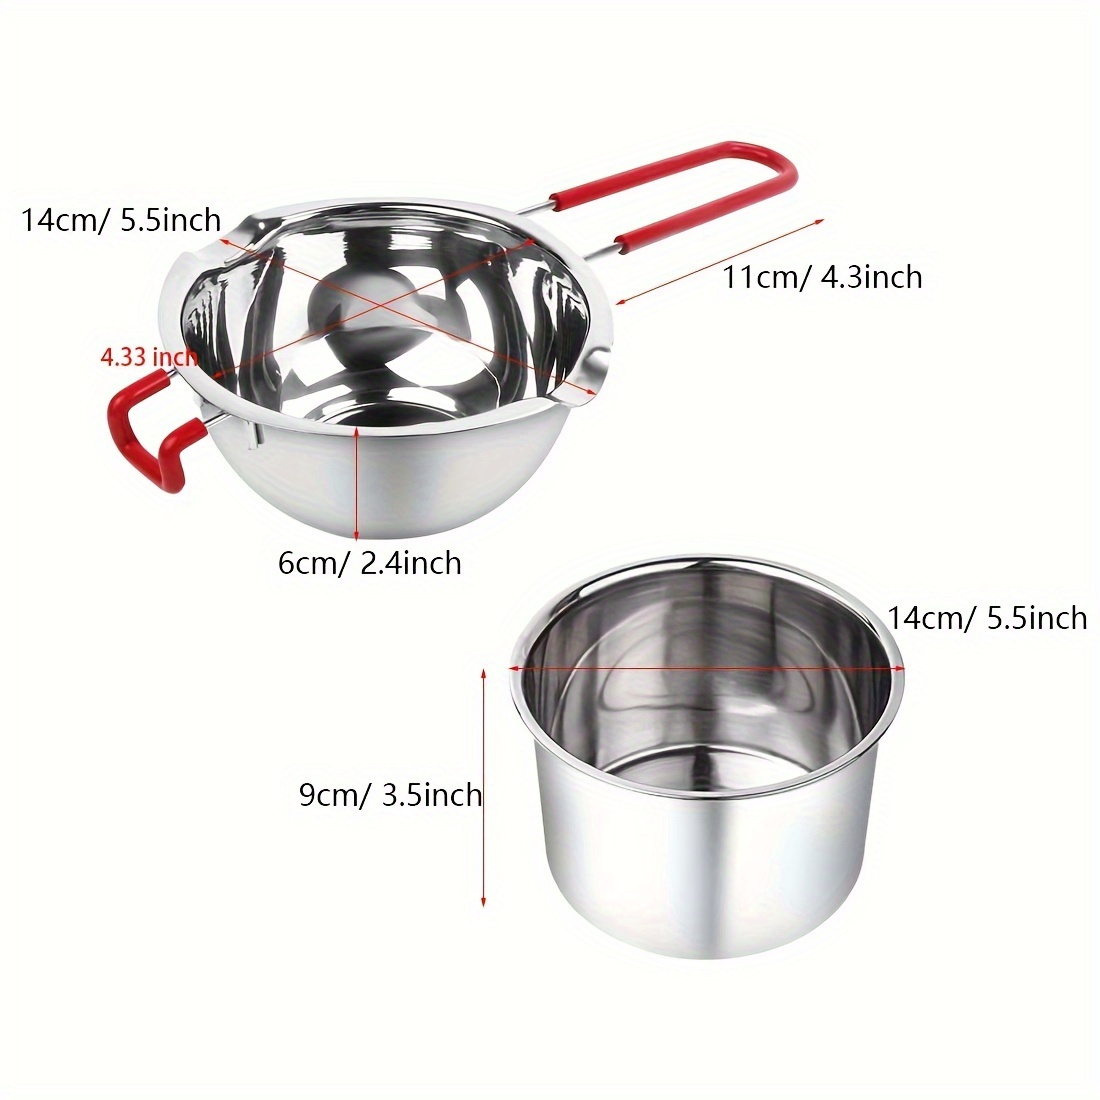 Stainless Steel Universal Melting Pot, Heat-Resistant Handle Candle Making Kit,Use for Melted Butter Chocolate Cheese Caramel, Silver